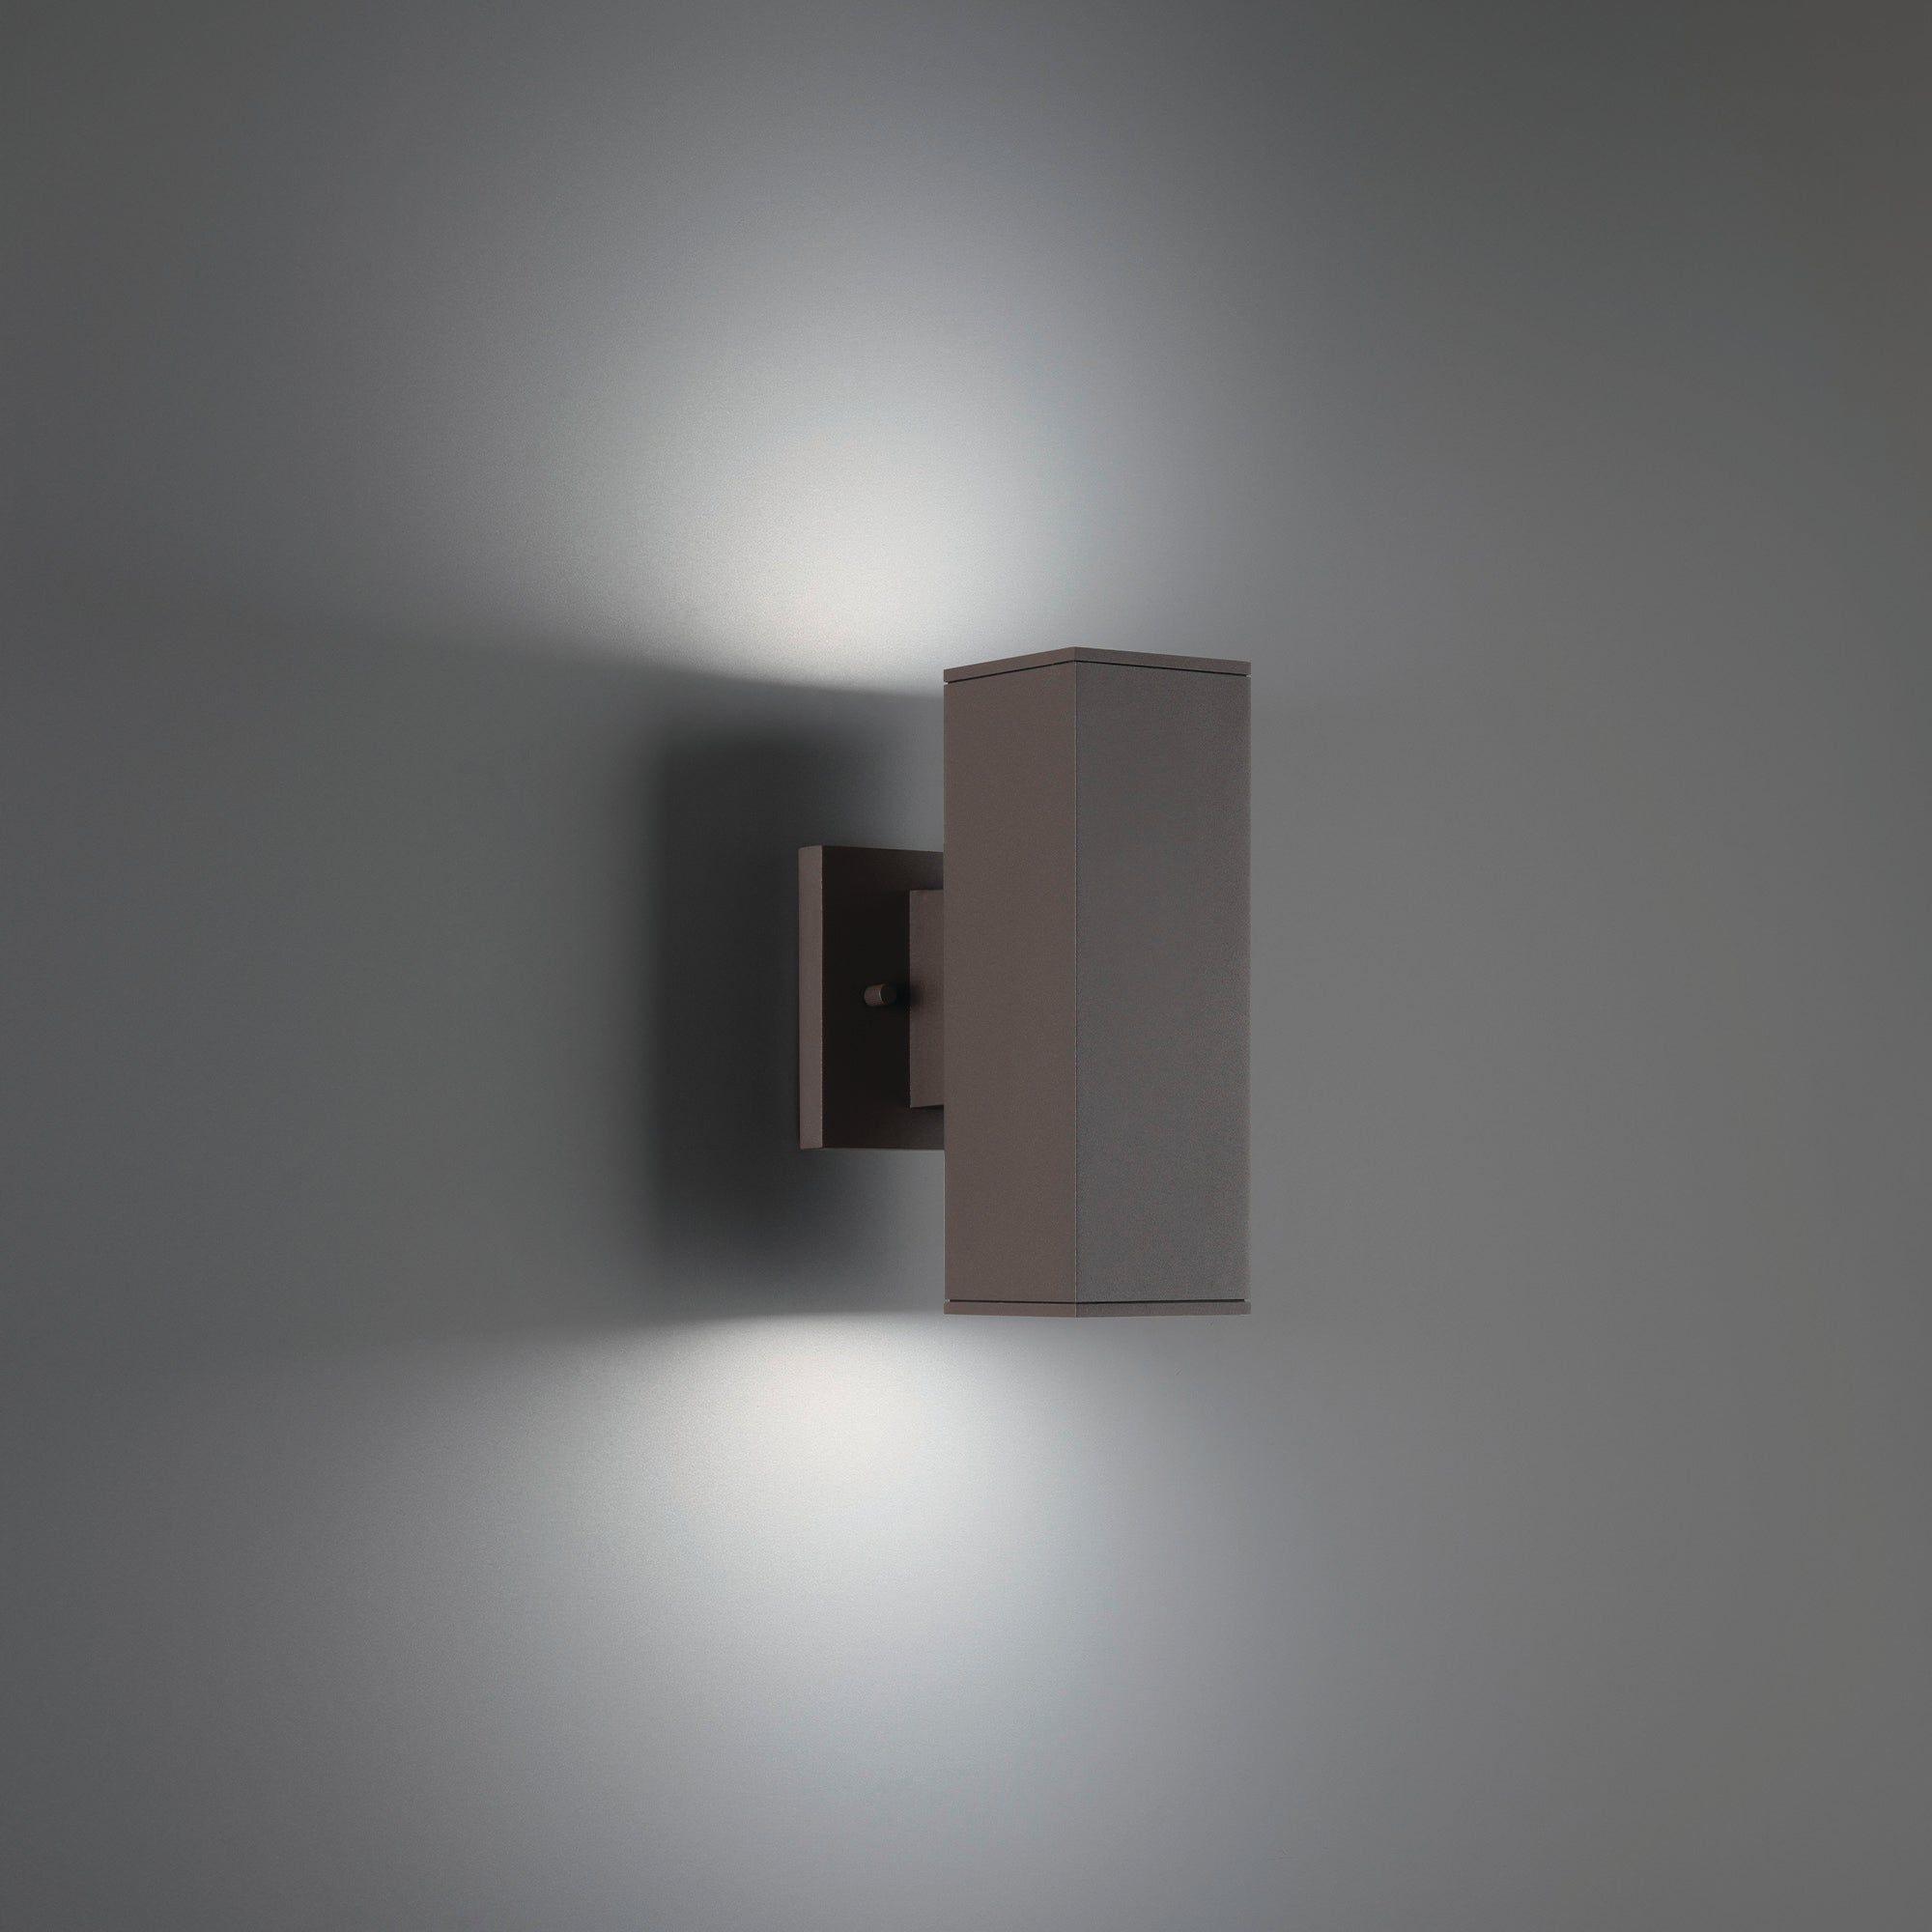 WAC Lighting - Cubix LED Double Up and Down Indoor/Outdoor Wall Light - Lights Canada